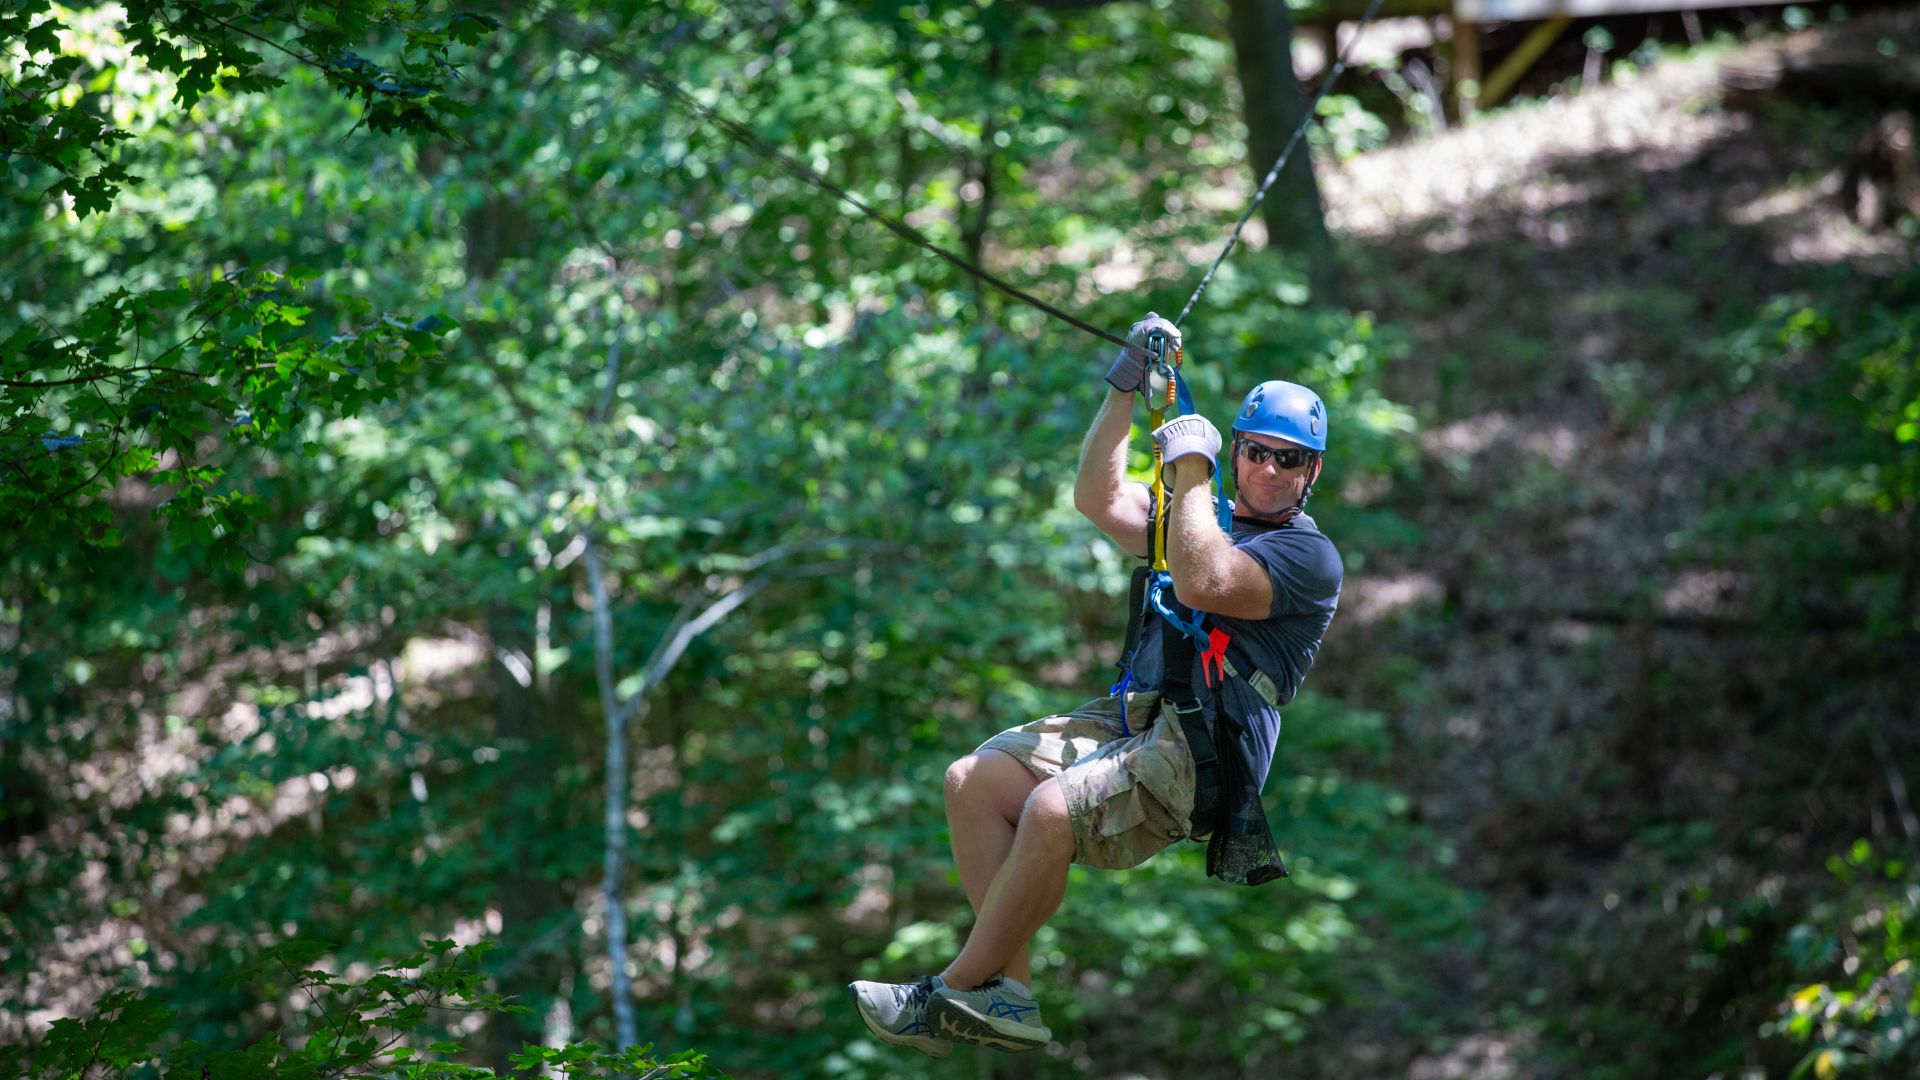 A man zip lines through the woods at Adventure Valley in St. Louis.